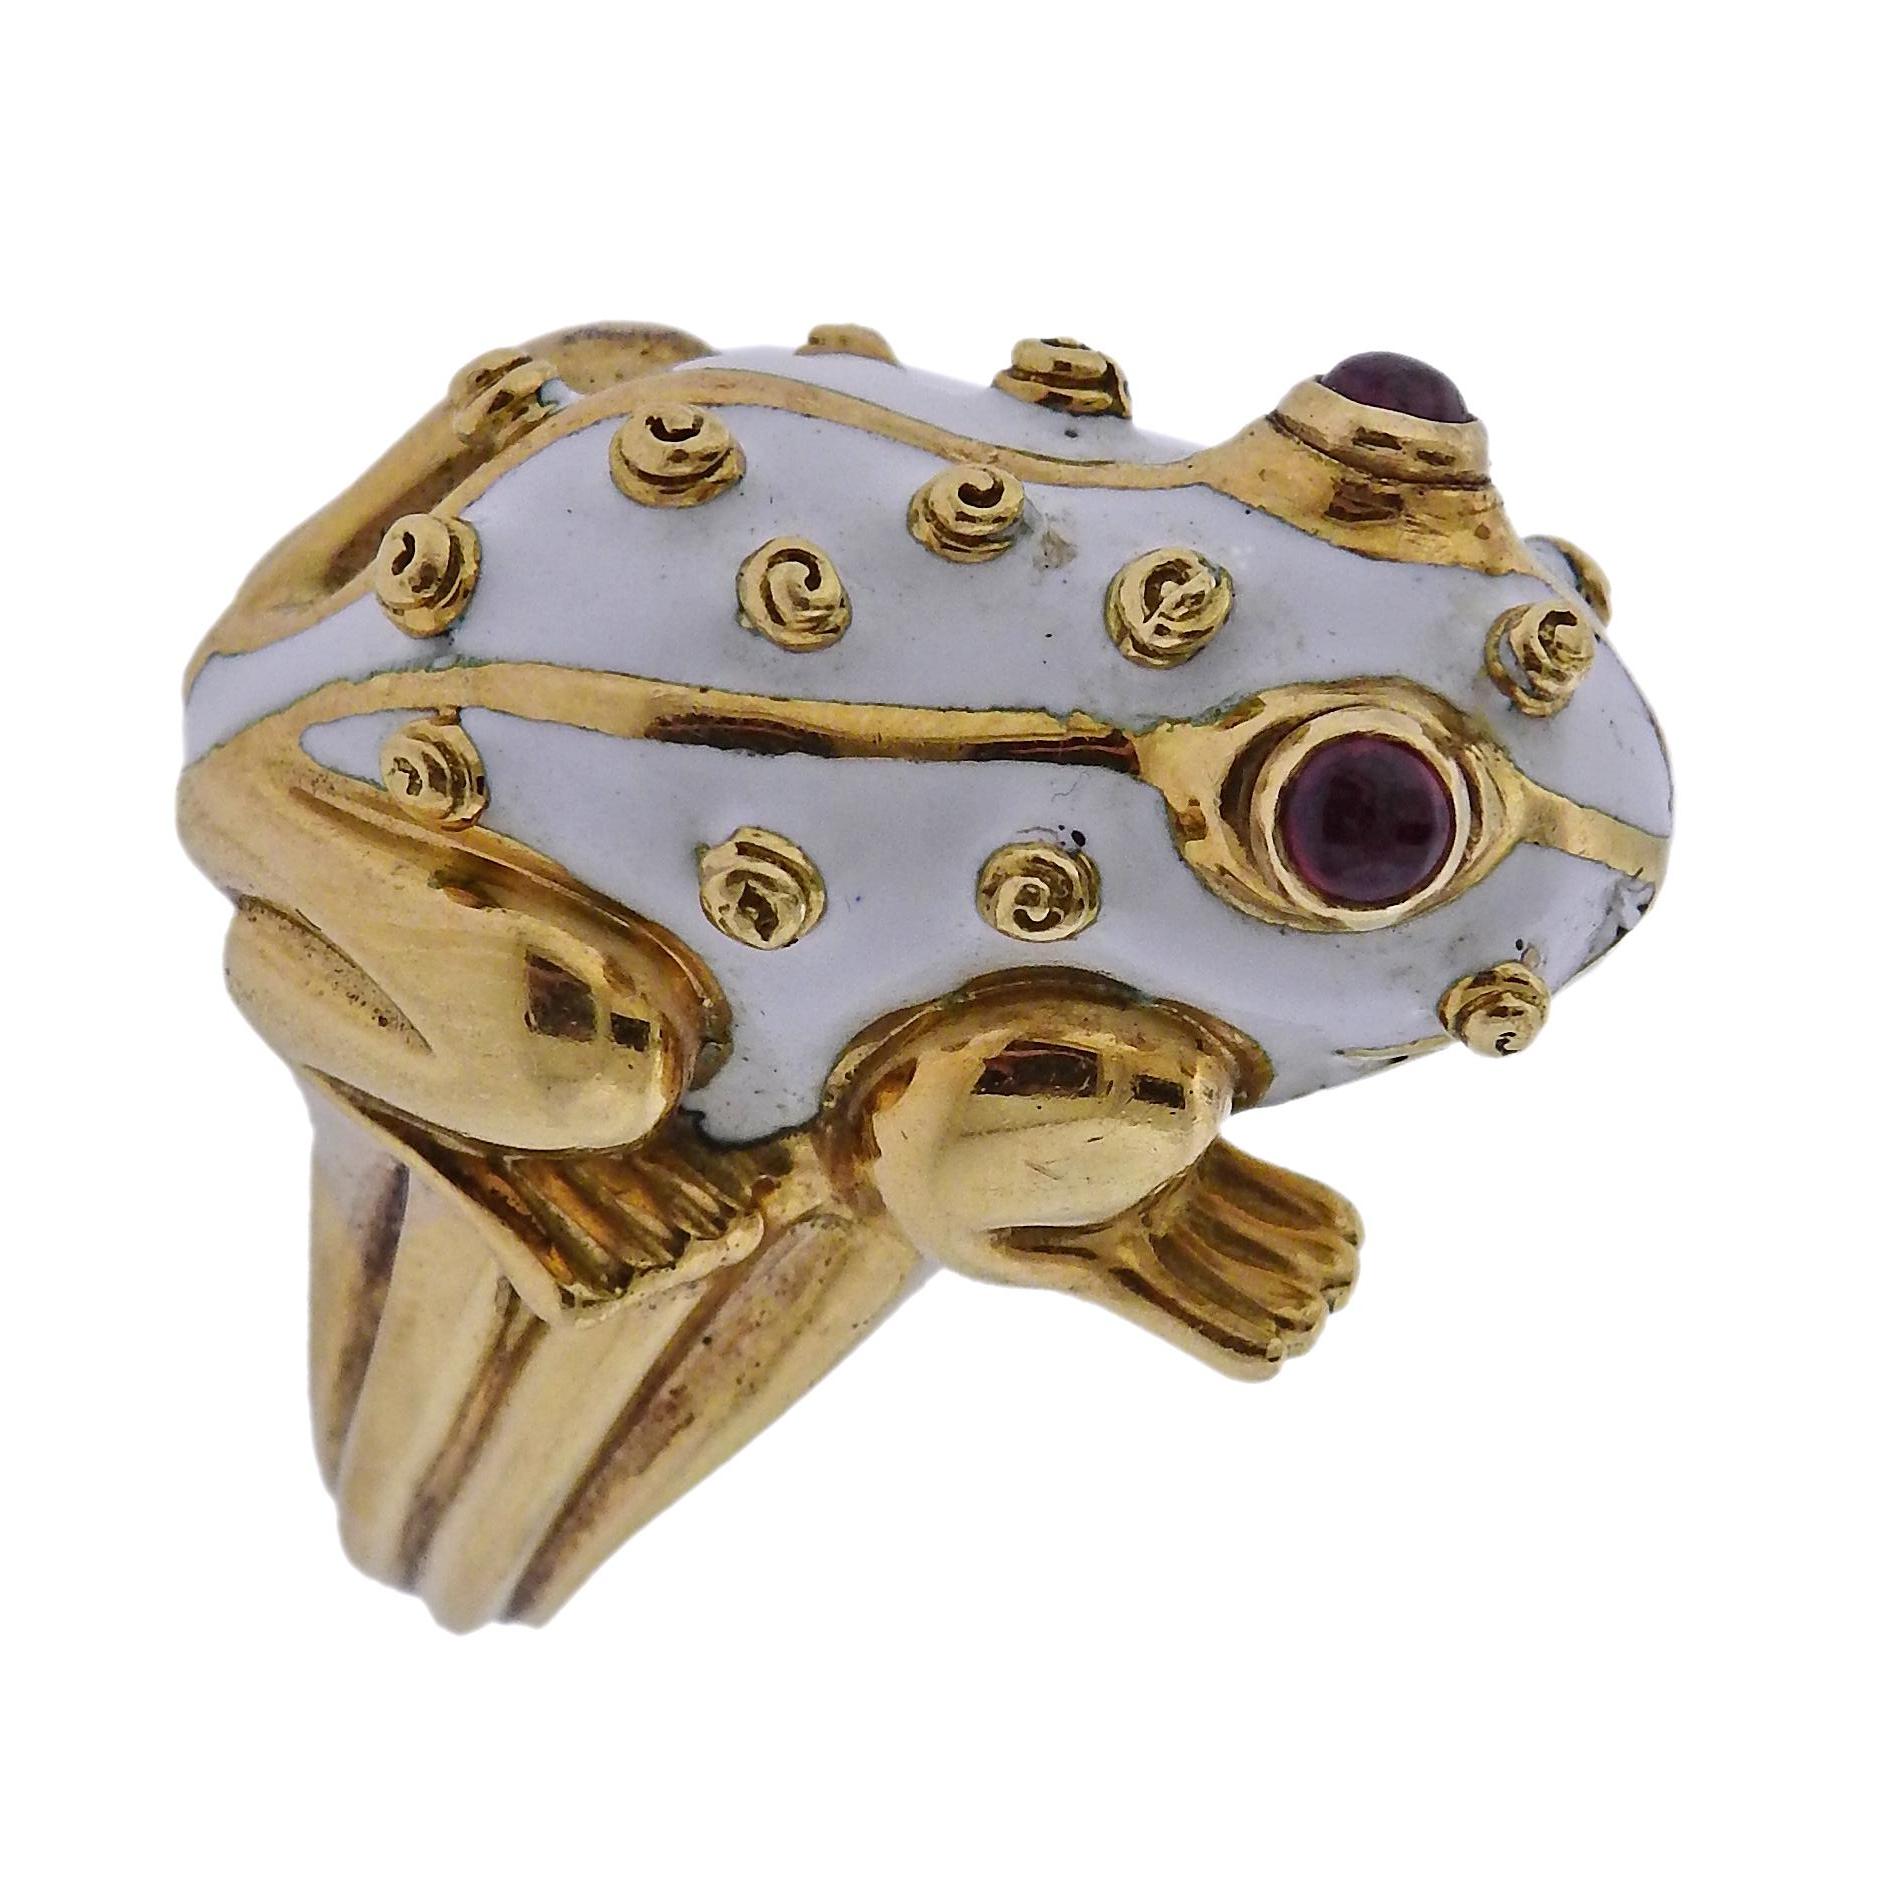 18k gold ring by David Webb, depicting white enamel frog, set with ruby cabochon eyes. Retail $9500. Ring size - 4.25, ring top is 25mm x 17mm, weighs 20.3 grams. Marked: Webb, 18k.